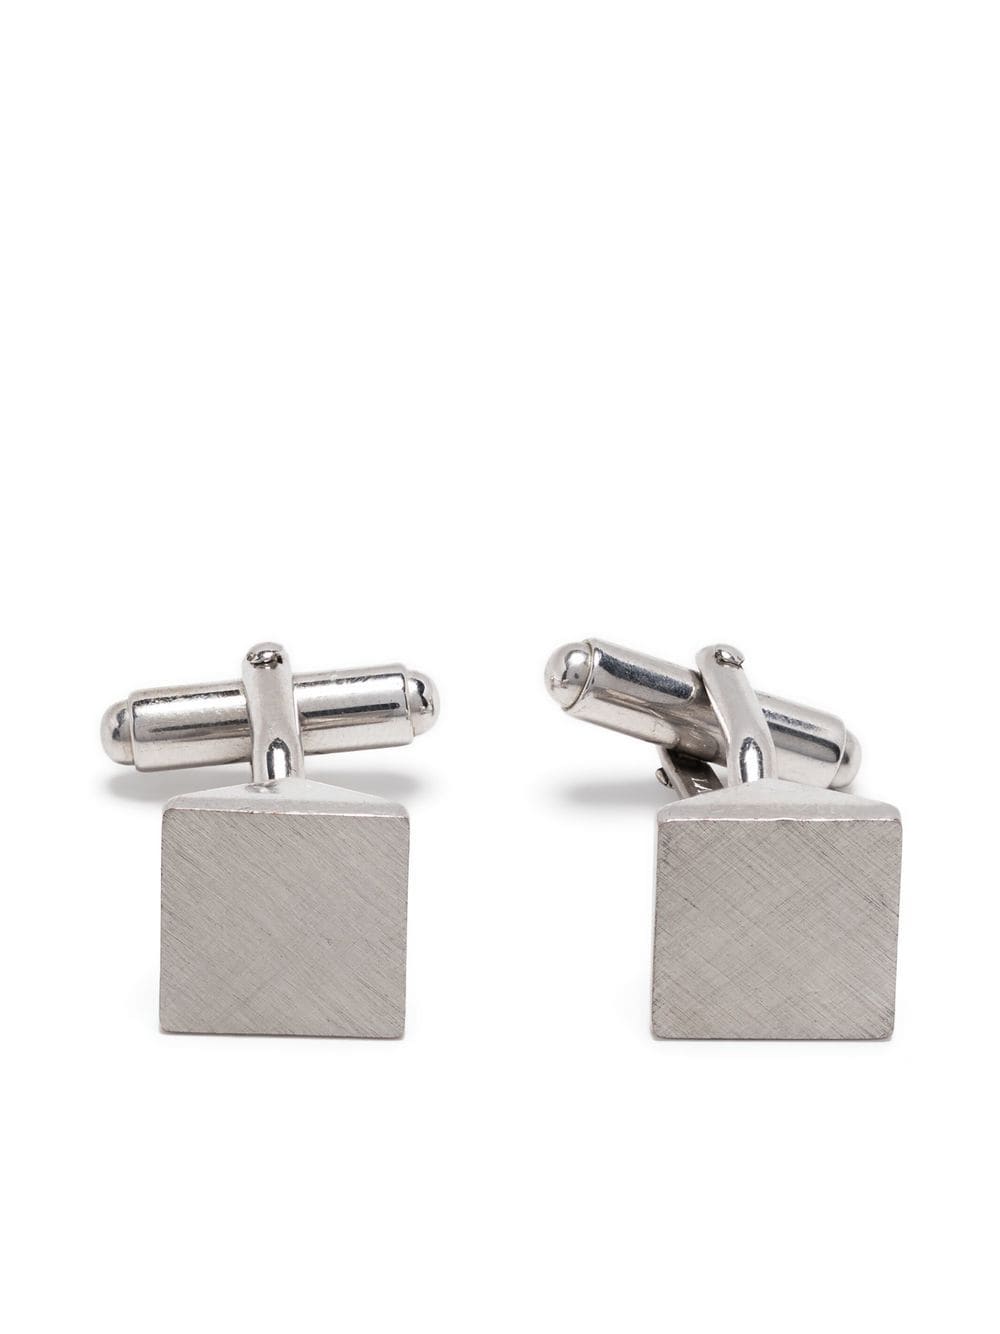 Lanvin Pre-Owned 1990s brushed effect silver-tone cufflinks von Lanvin Pre-Owned